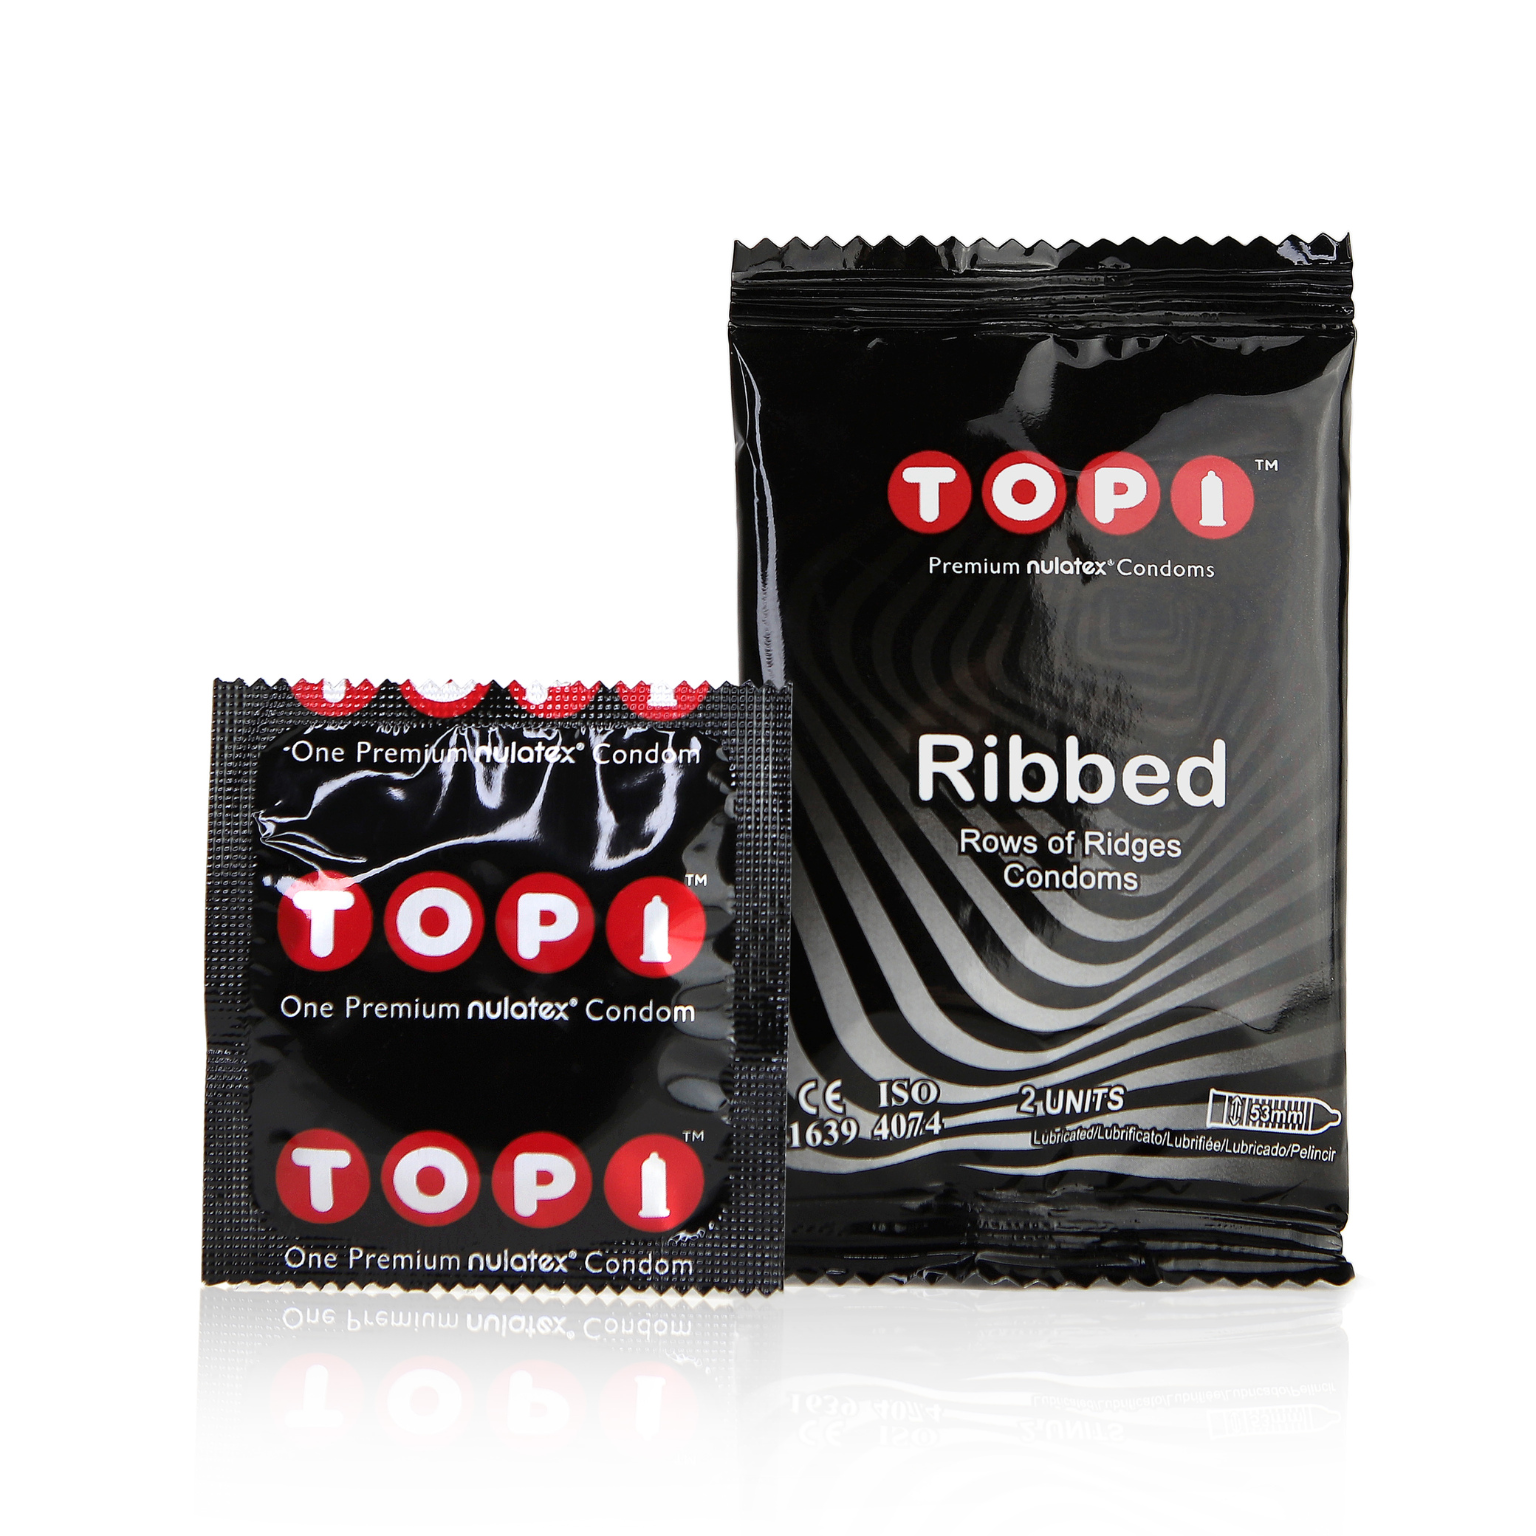 TOPI Ribbed Foil and Pillow Pack